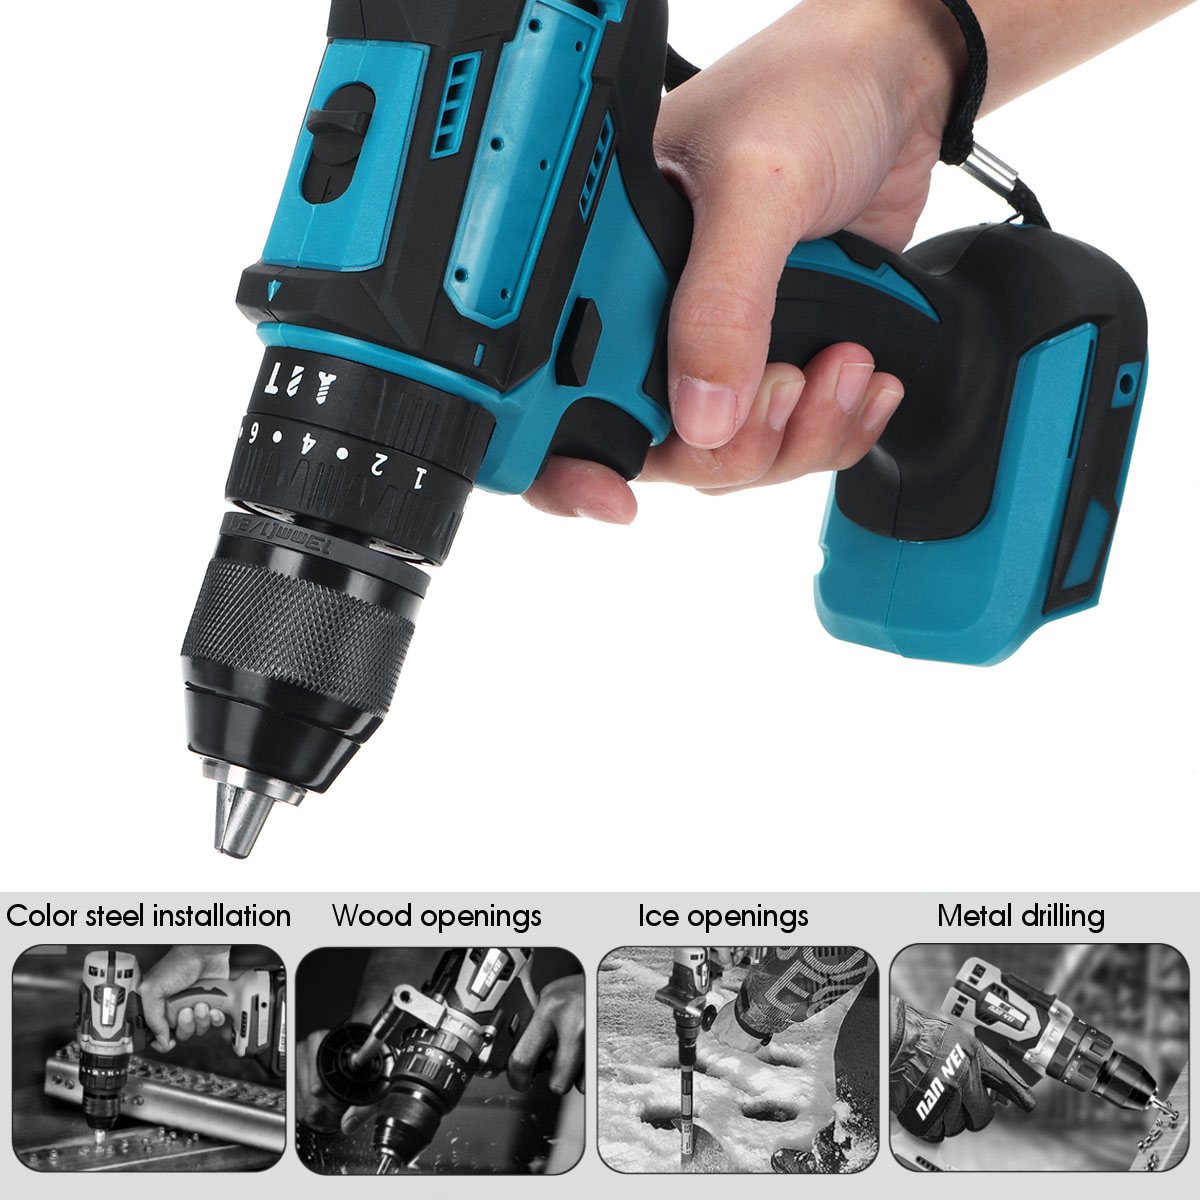 10mm-Chuck-Impact-Drill-350Nm-Cordless-Electric-Drill-For-Makita-18V-Battery-4000RPM-LED-Light-Power-1642853-4